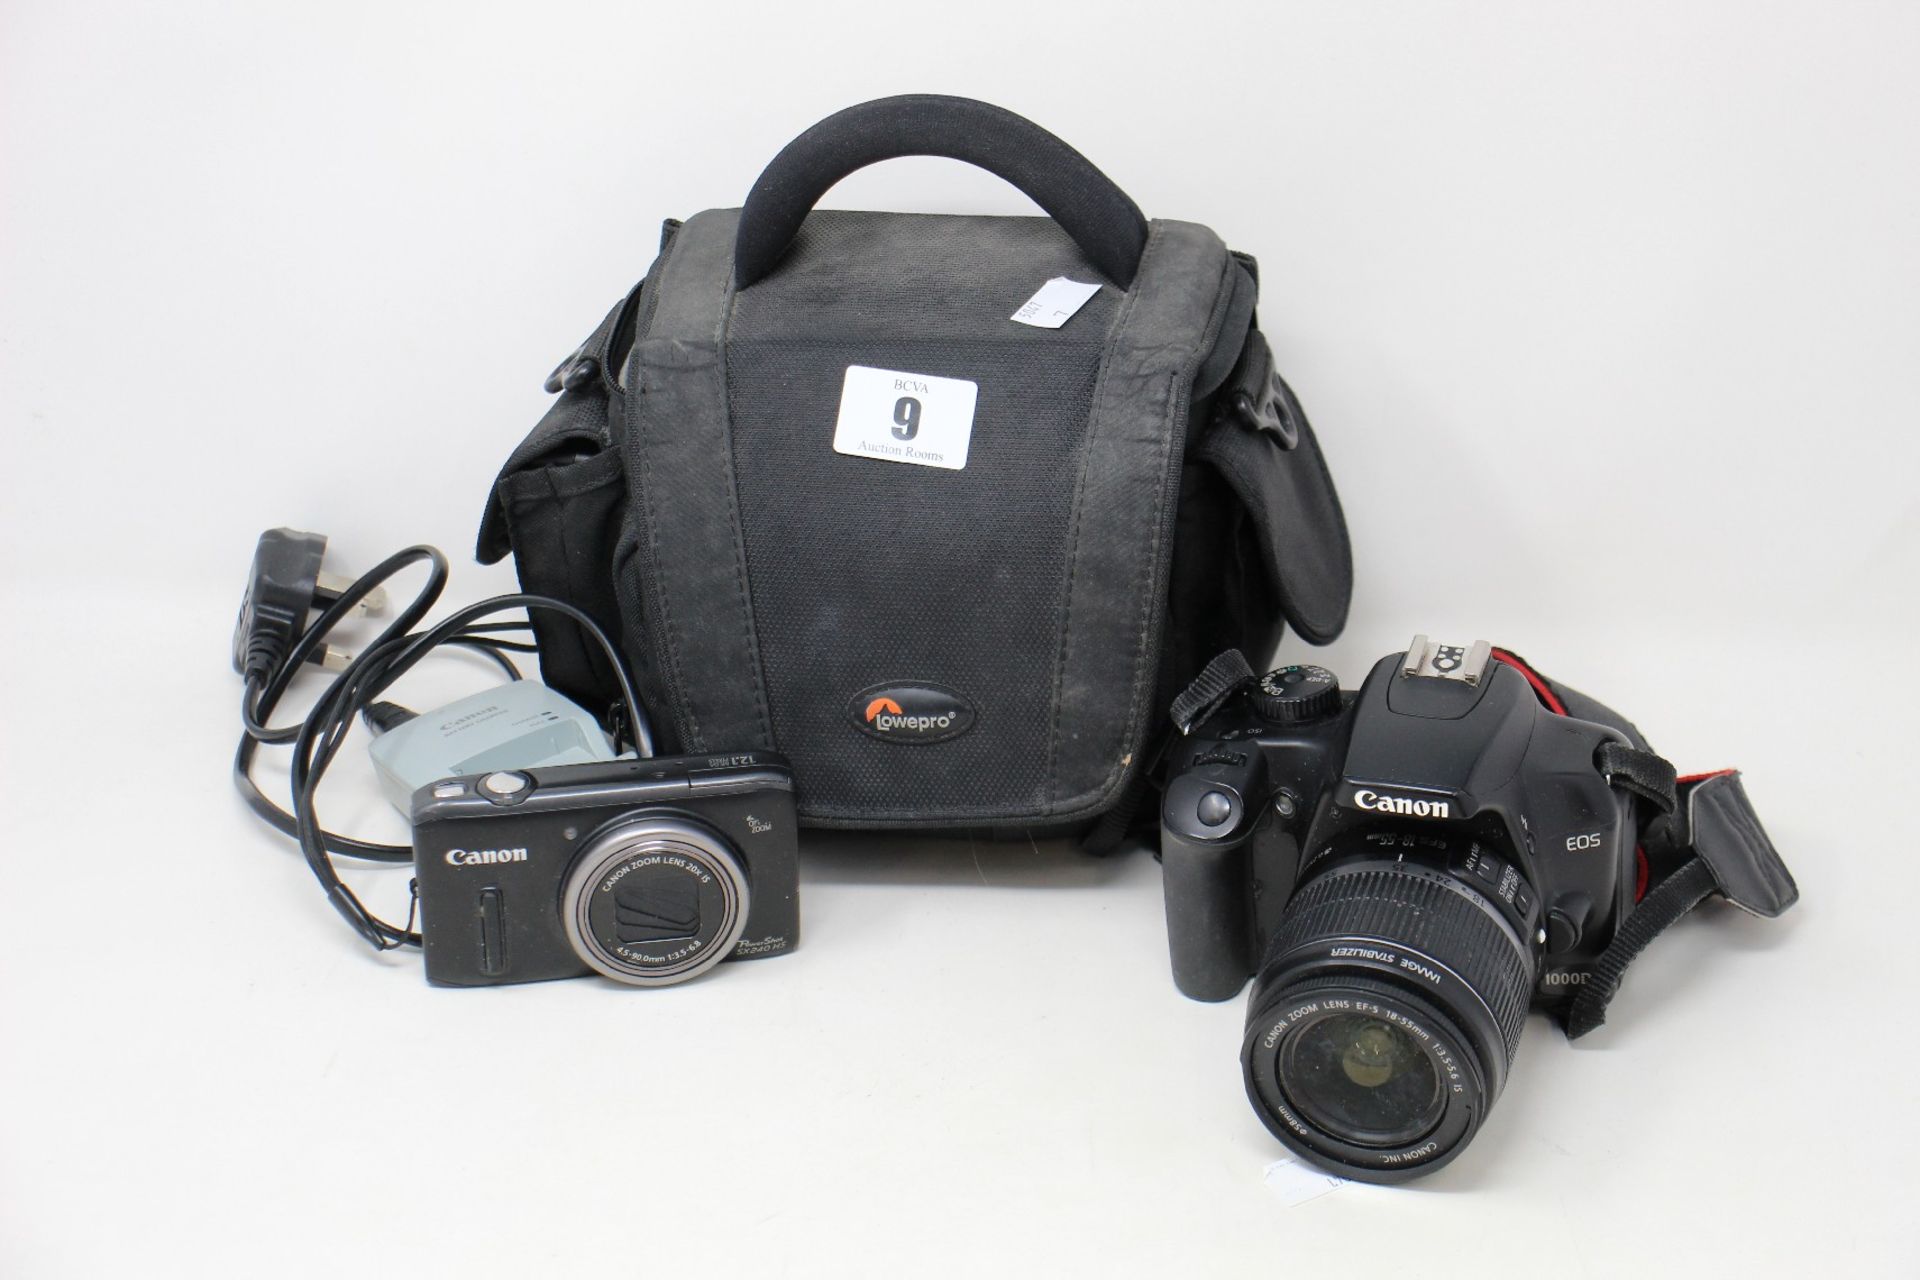 A pre owned Canon EOS 100d camera with charger and case and a Canon powershot sx240hs with charger.